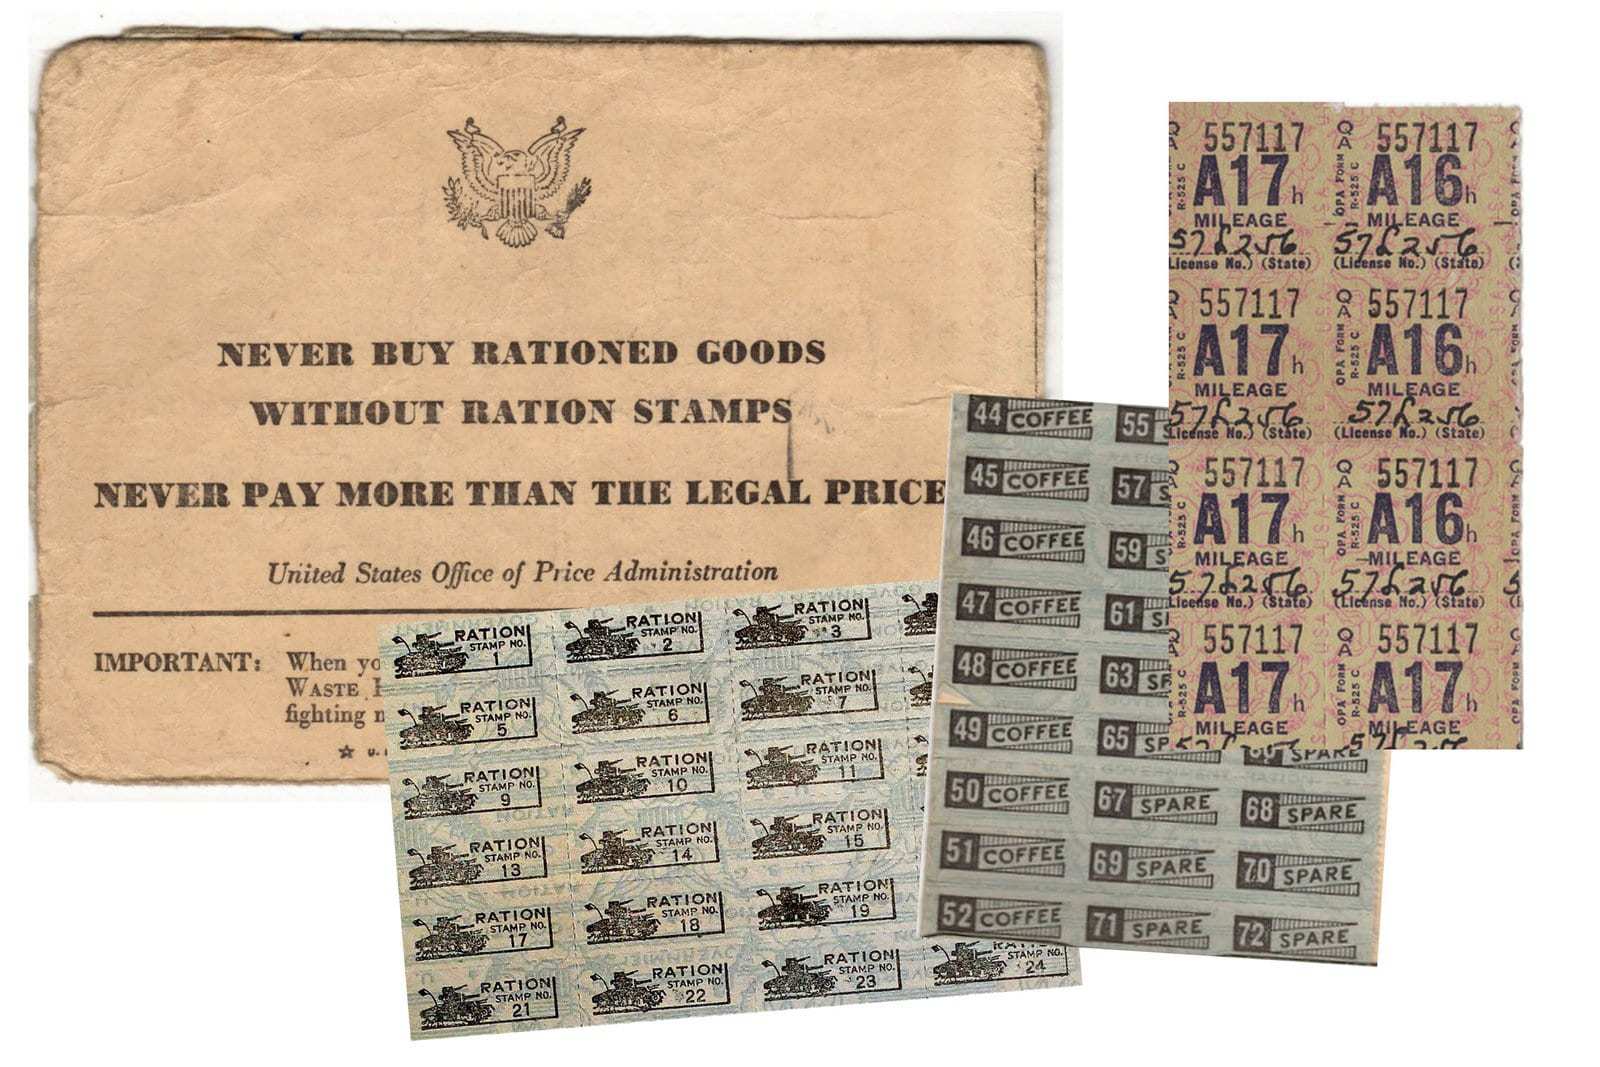 Ration-stamps-from-WW2-See-War-Ration-Book-4-plus-coffee-stamps-sugar-coupons-more-from-the-40s.jpg